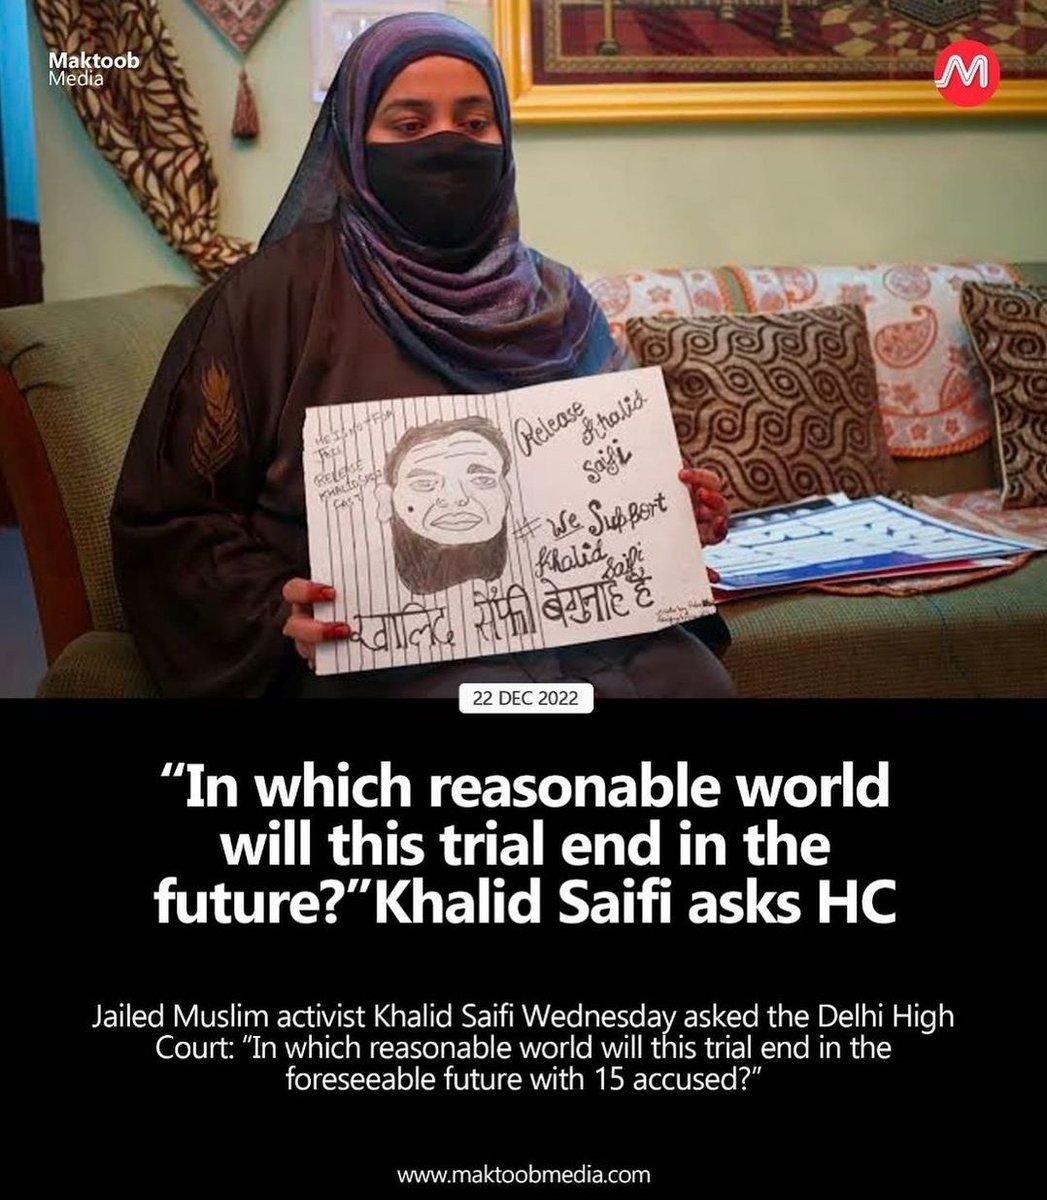 #ReleaseKhalidSaifi
Khalid Saifi, was arrested on February 26, 2020, on false charges In delhi pogrom 2020.

His only crime is that he stands up against the draconian & communal policies of the state.

He is in jail since 1195 Days!

'Justice delayed is justice denied'.